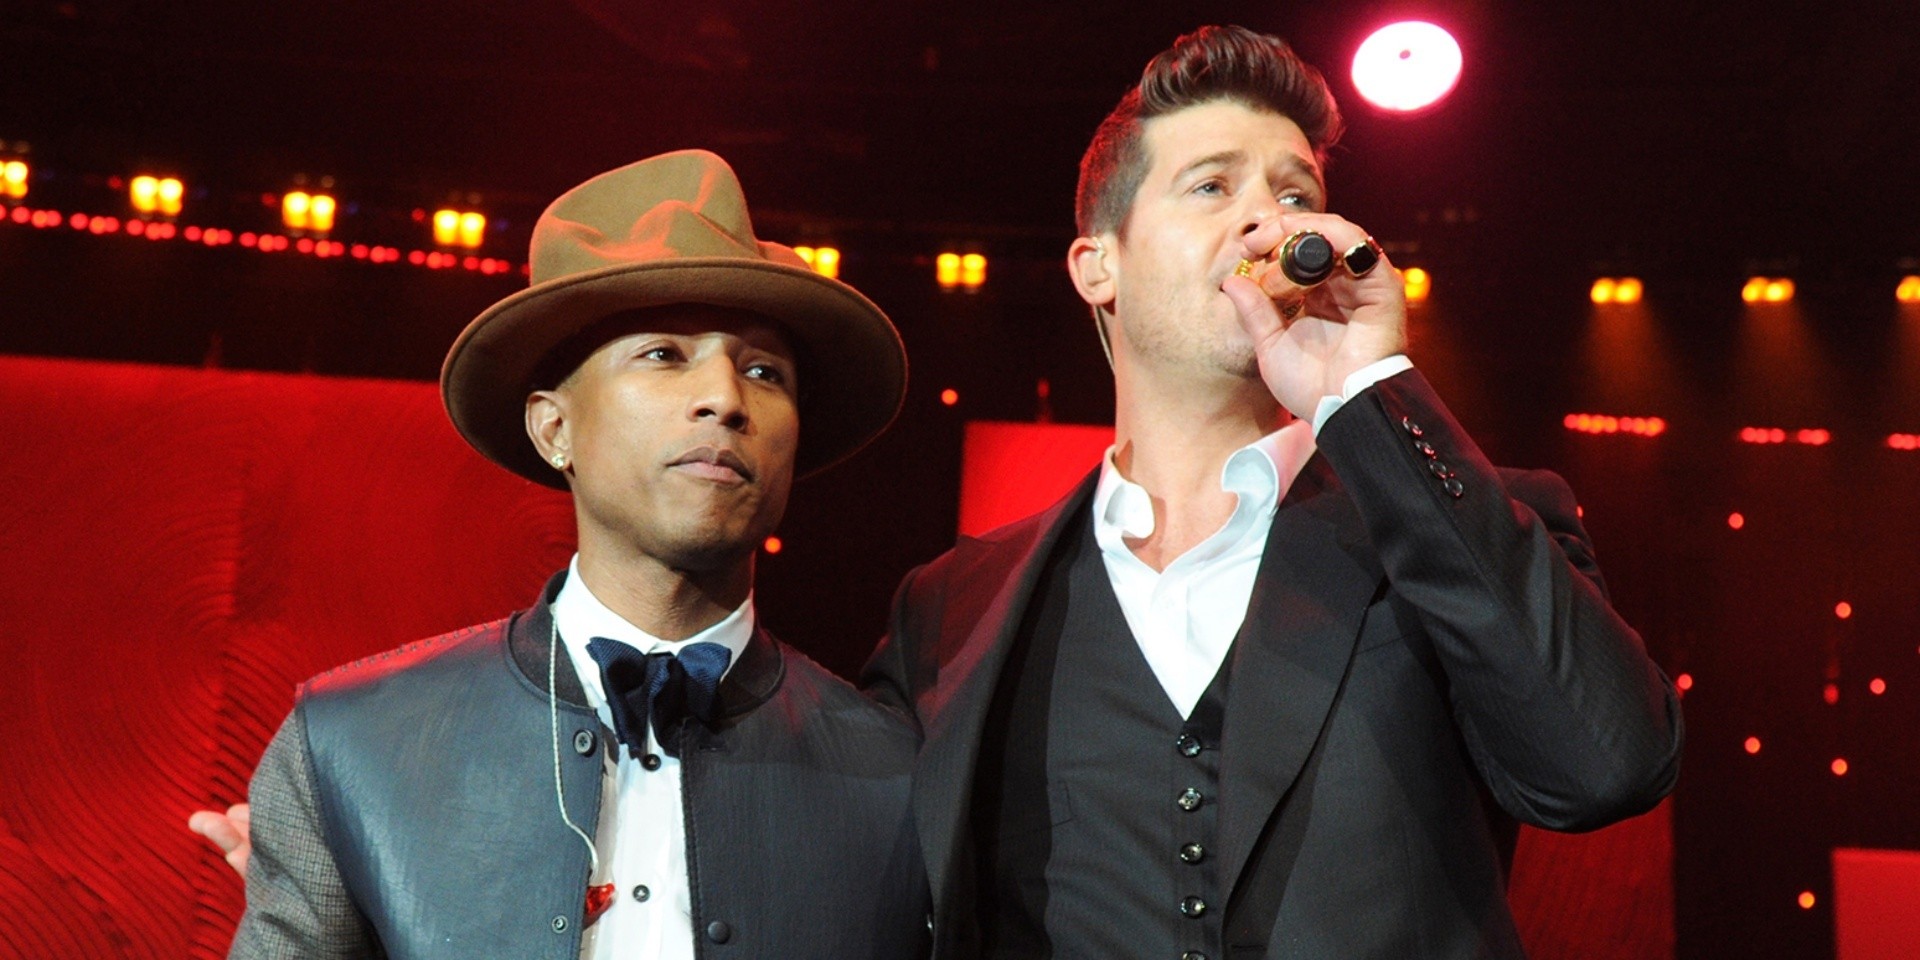 Robin Thicke and Pharrell Williams' 'Blurred Lines' copyright lawsuit concludes in a $5 million payout